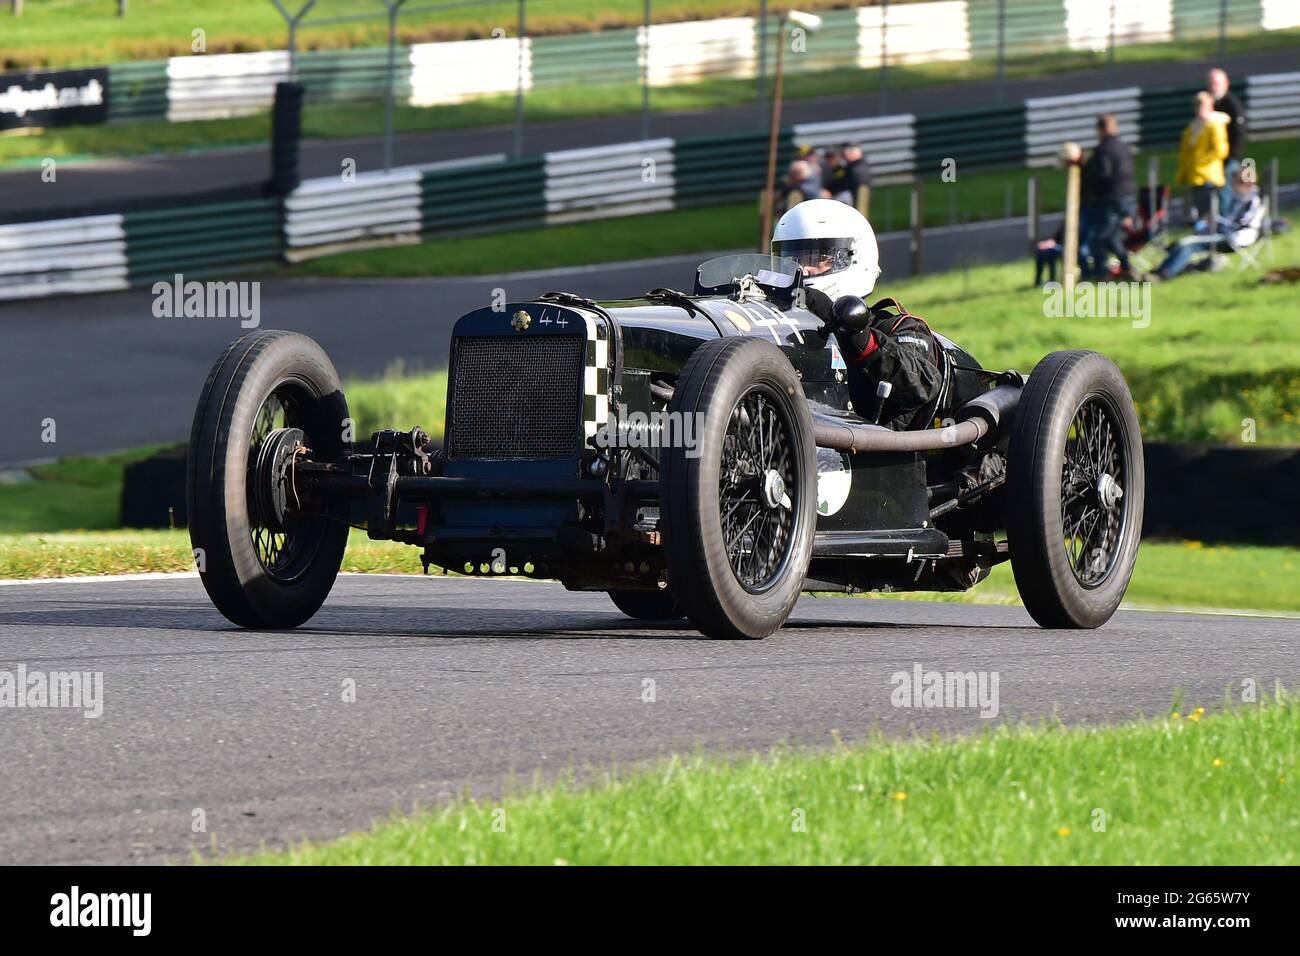 Nicholas Powell, Austin/MG LA Special, Allcomers Scratch Race for Pre-War Cars, VSCC, Shuttleworth Nuffield and Len Thompson Trophies Race Meeting, Ca Stock Photo